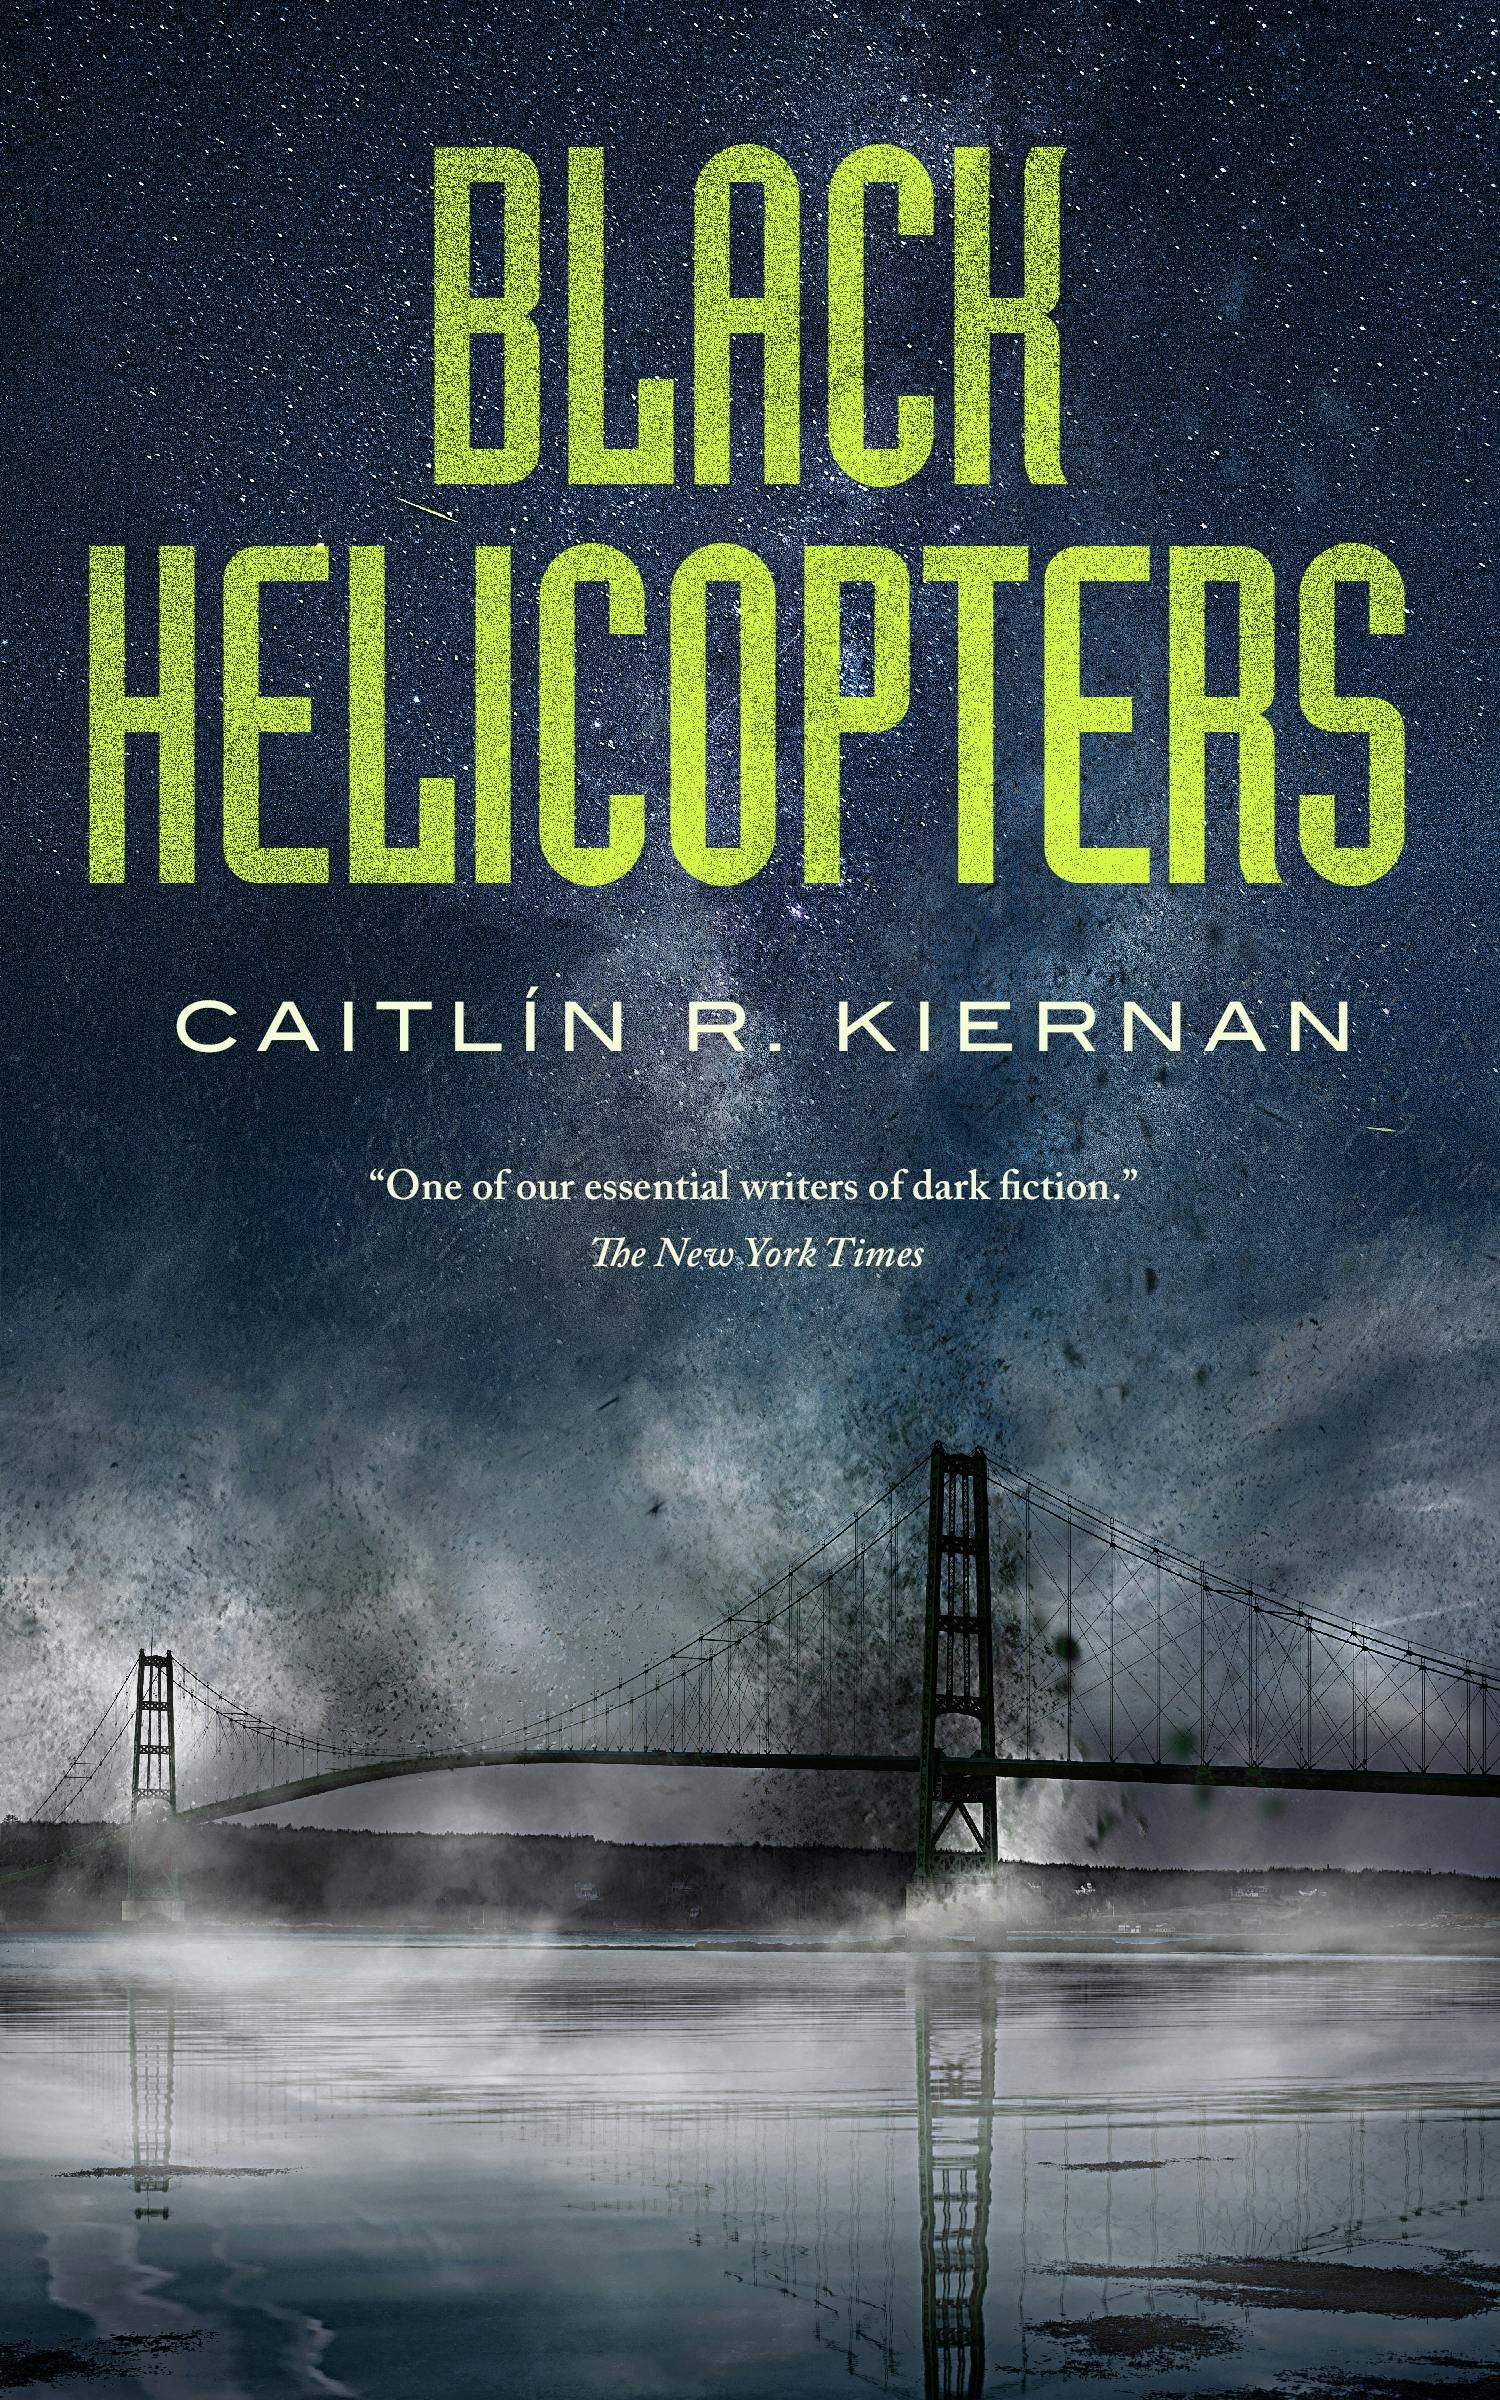 Cover for the book titled as: Black Helicopters